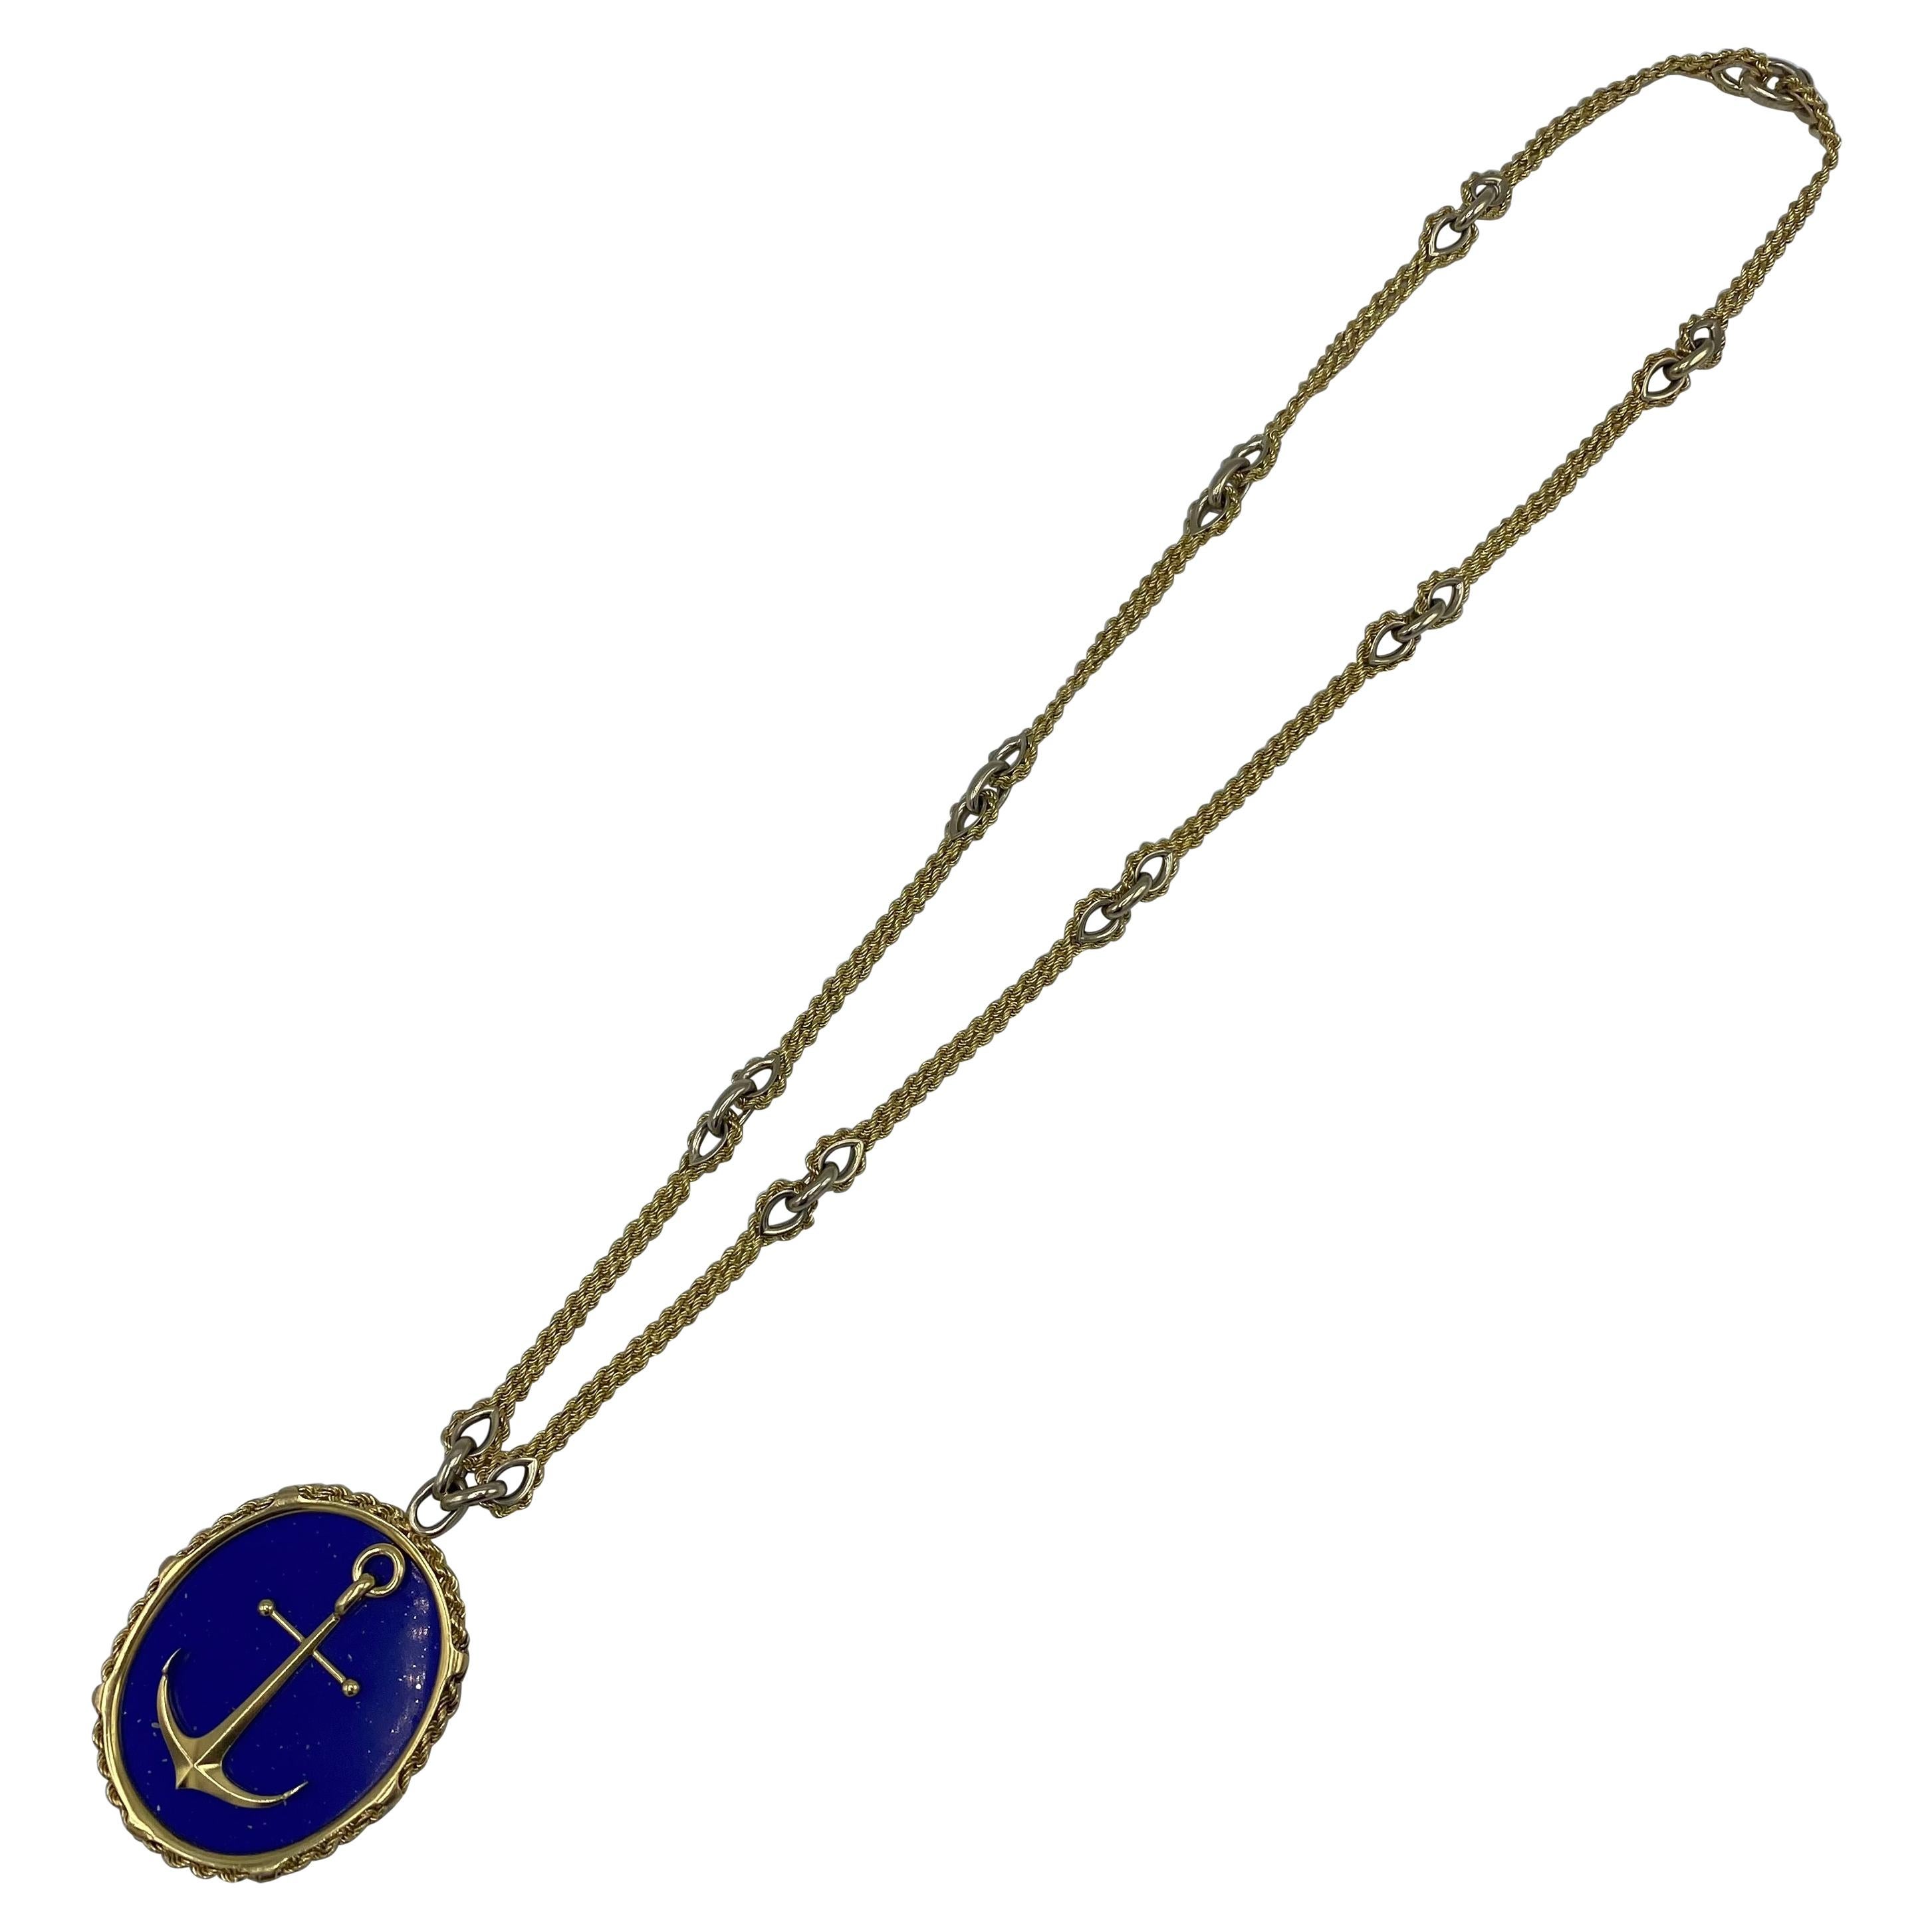 Product details:

The necklace and the pendant both signed by Piaget. The necklace is made out of 18 karat yellow gold and it features twisted robe link with nautical motif. The pendant is made out of 18 karat yellow gold and lapis, featuring